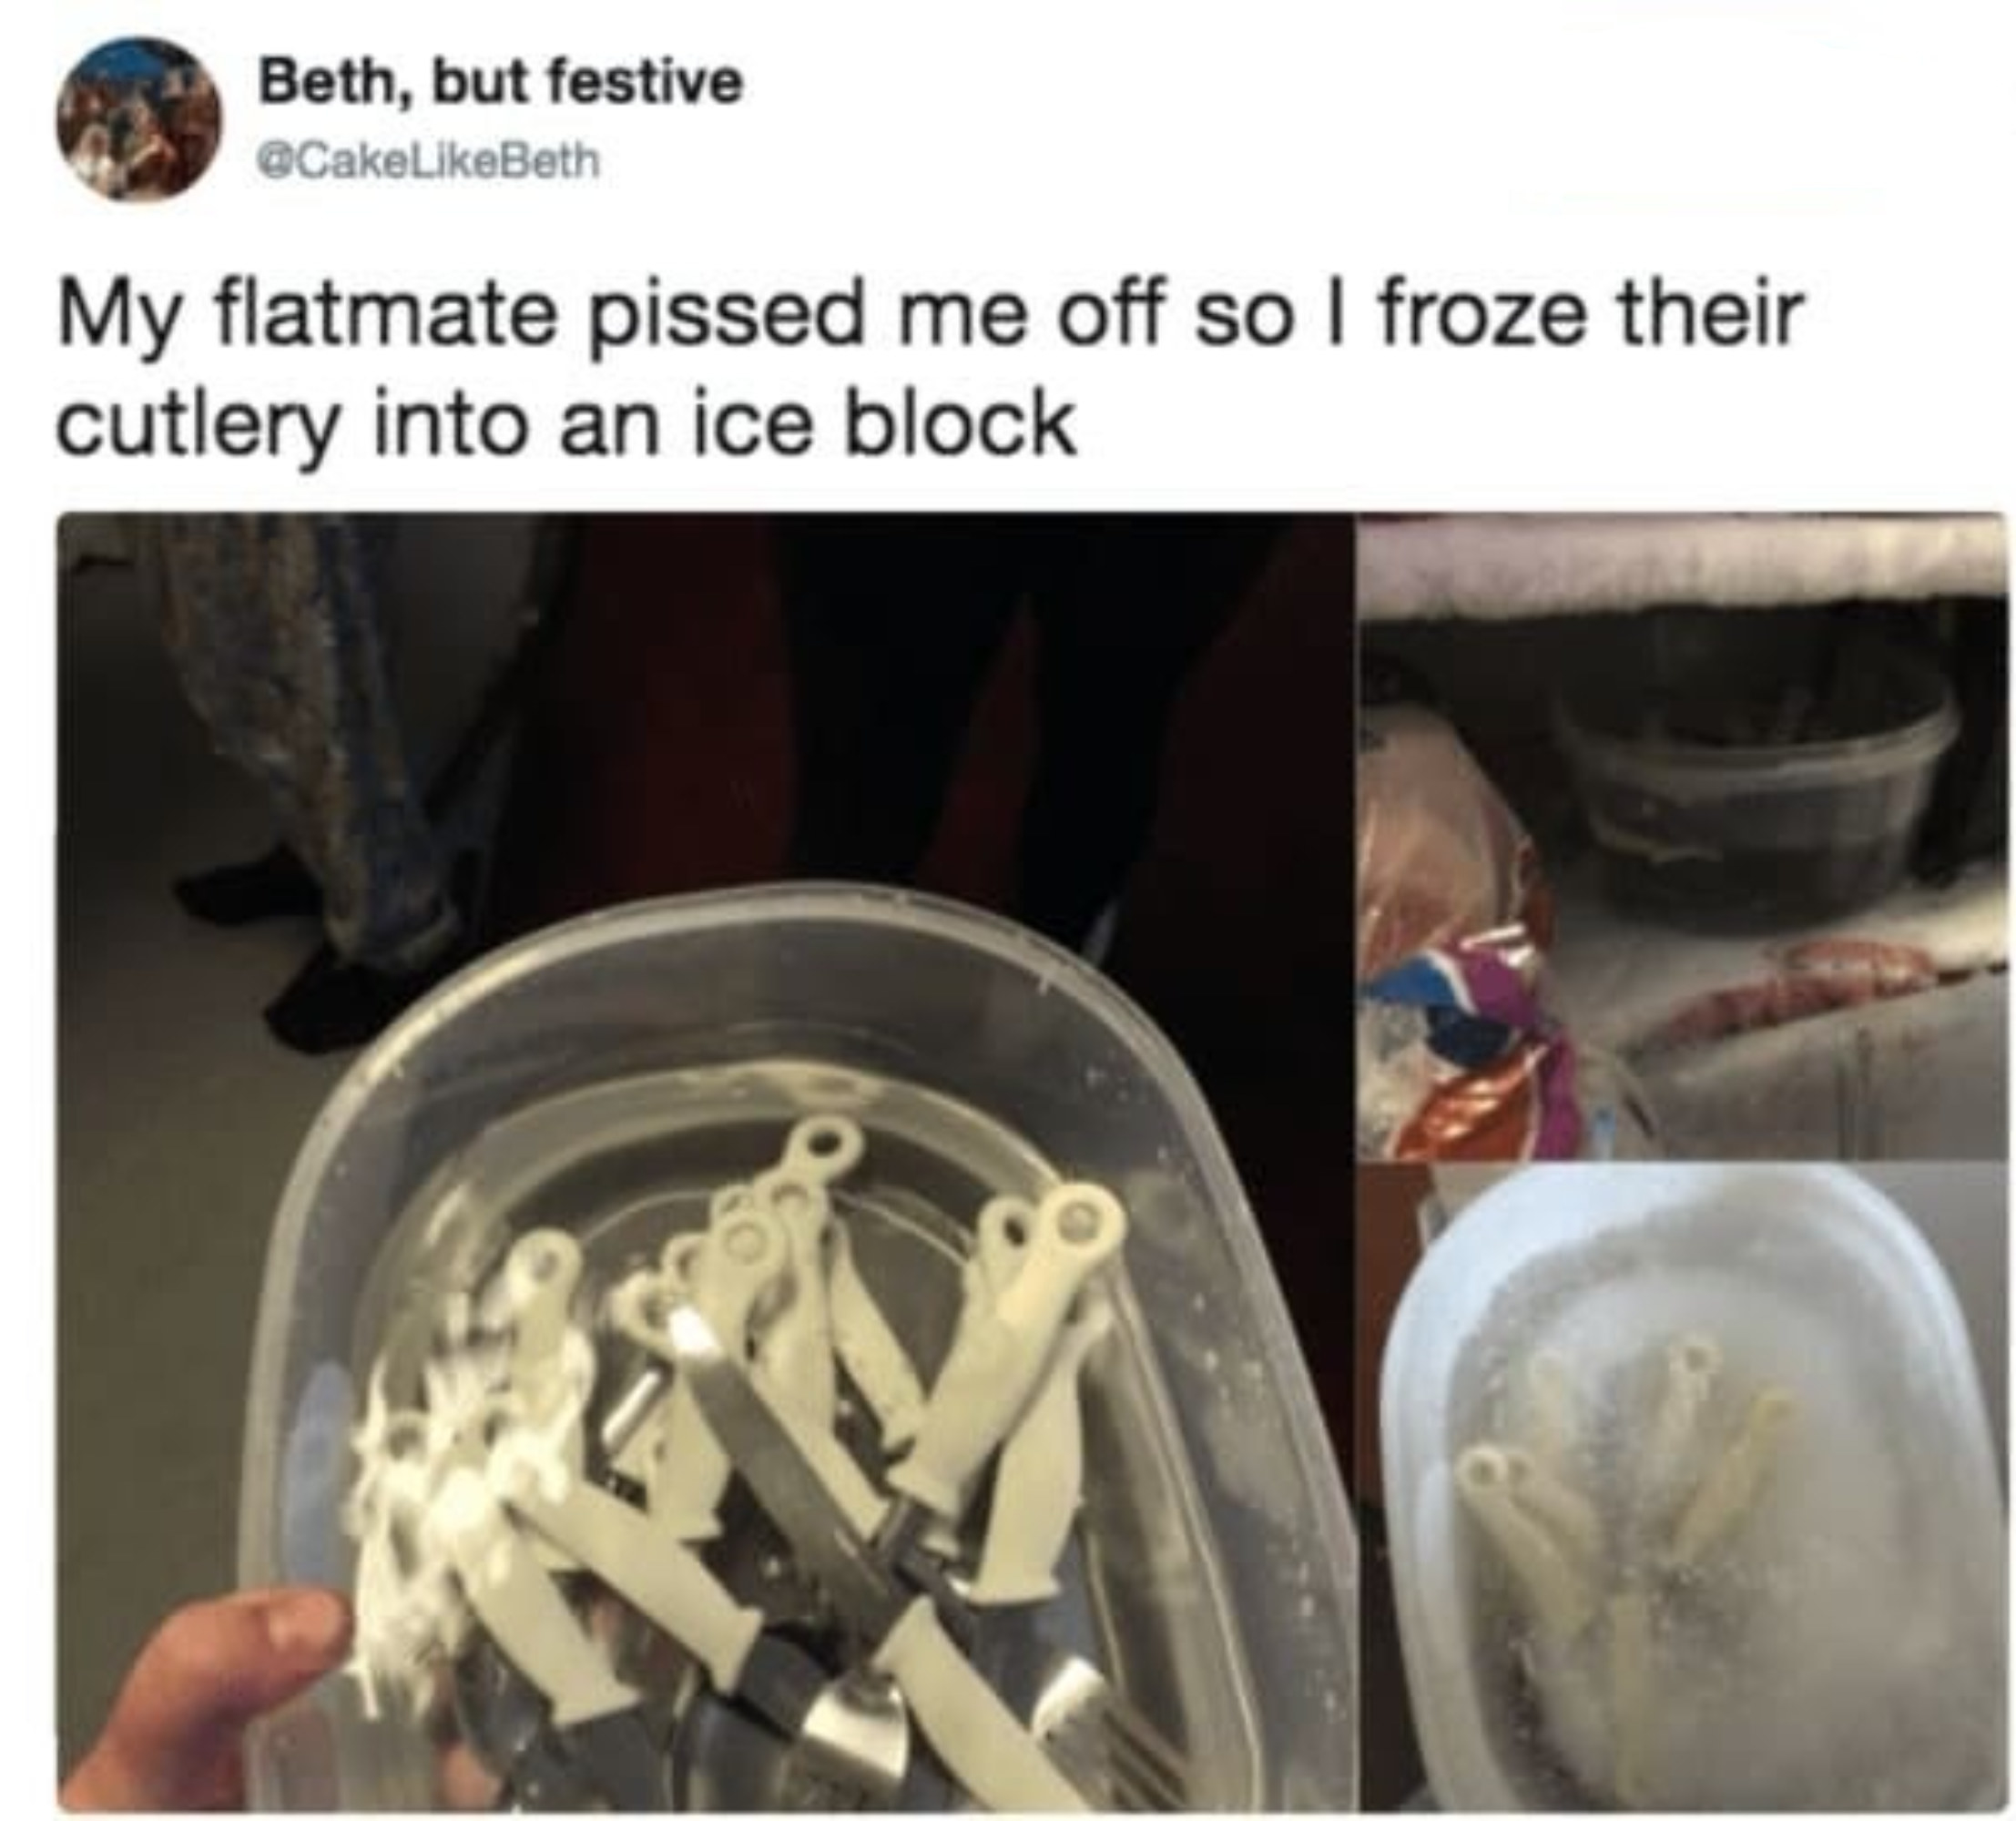 Someone freezes cutlery because their flatmate pissed them off